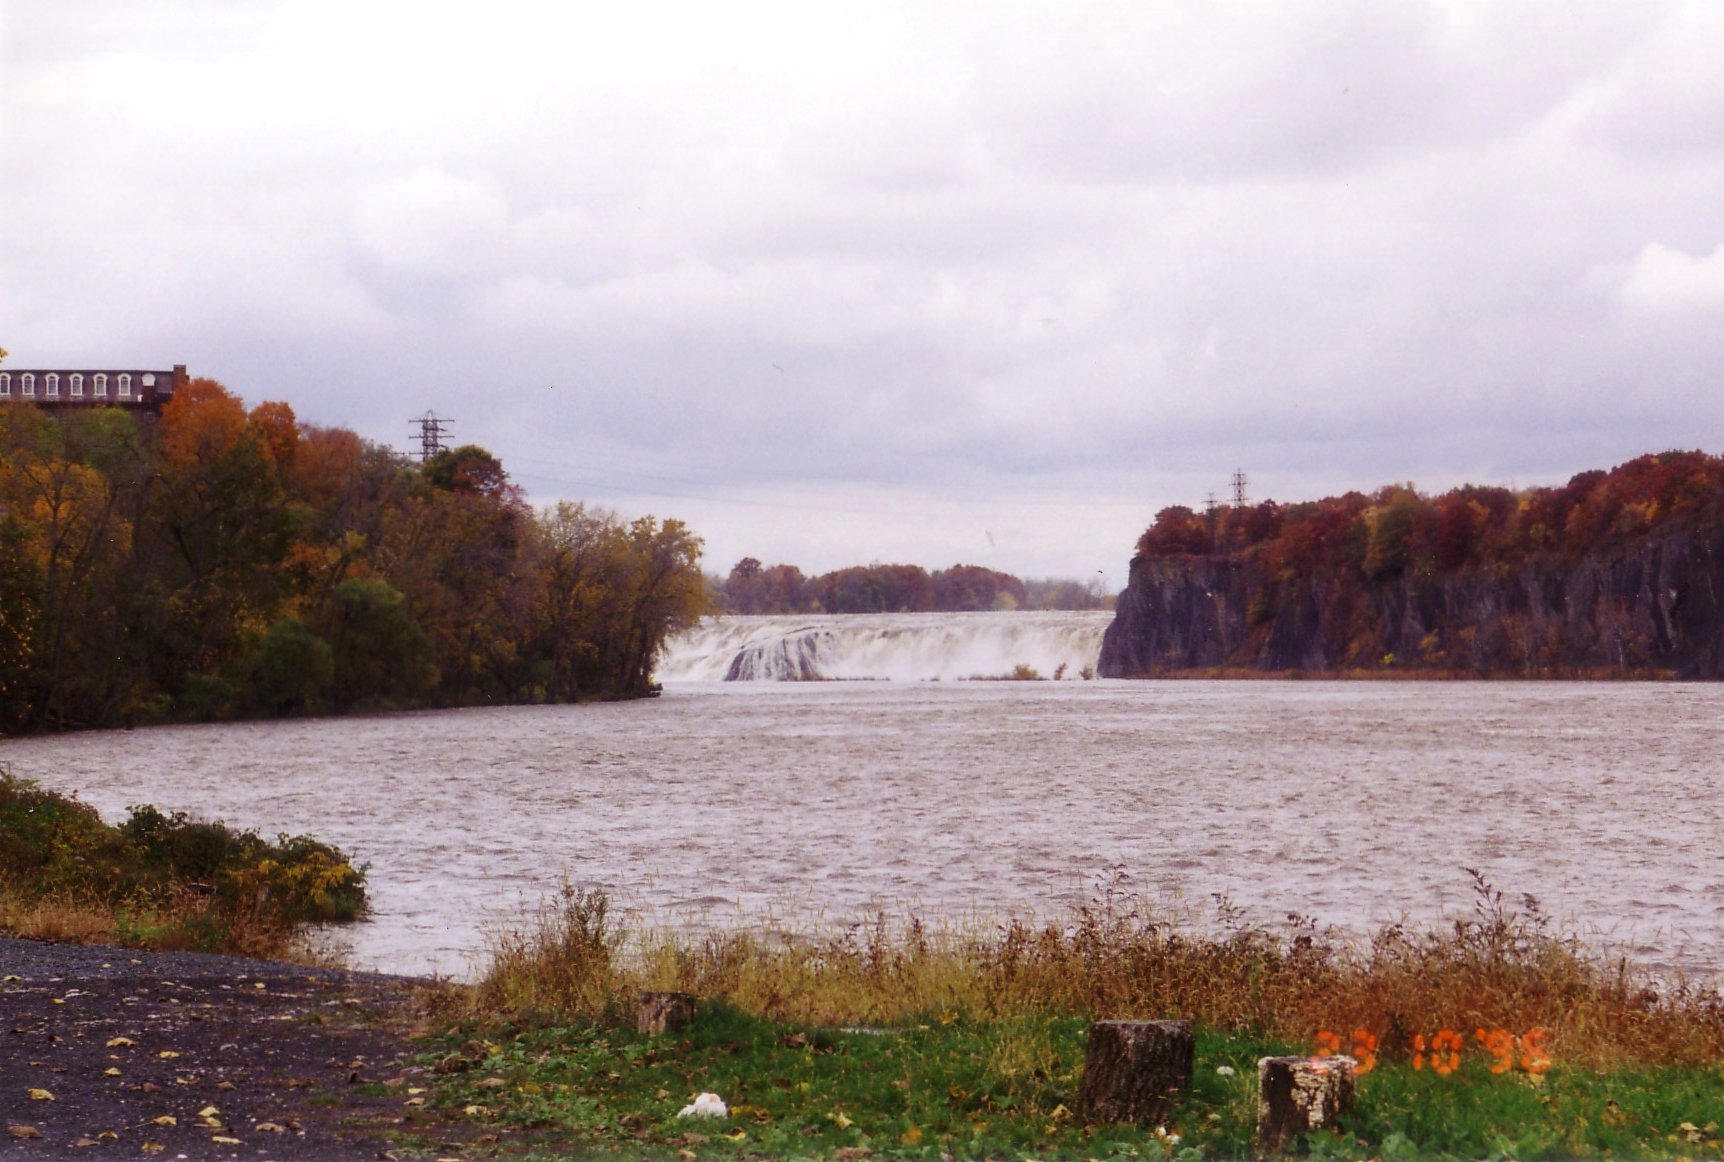 Photograph of the Mohawk River at Cohoes, NY (COHN6)